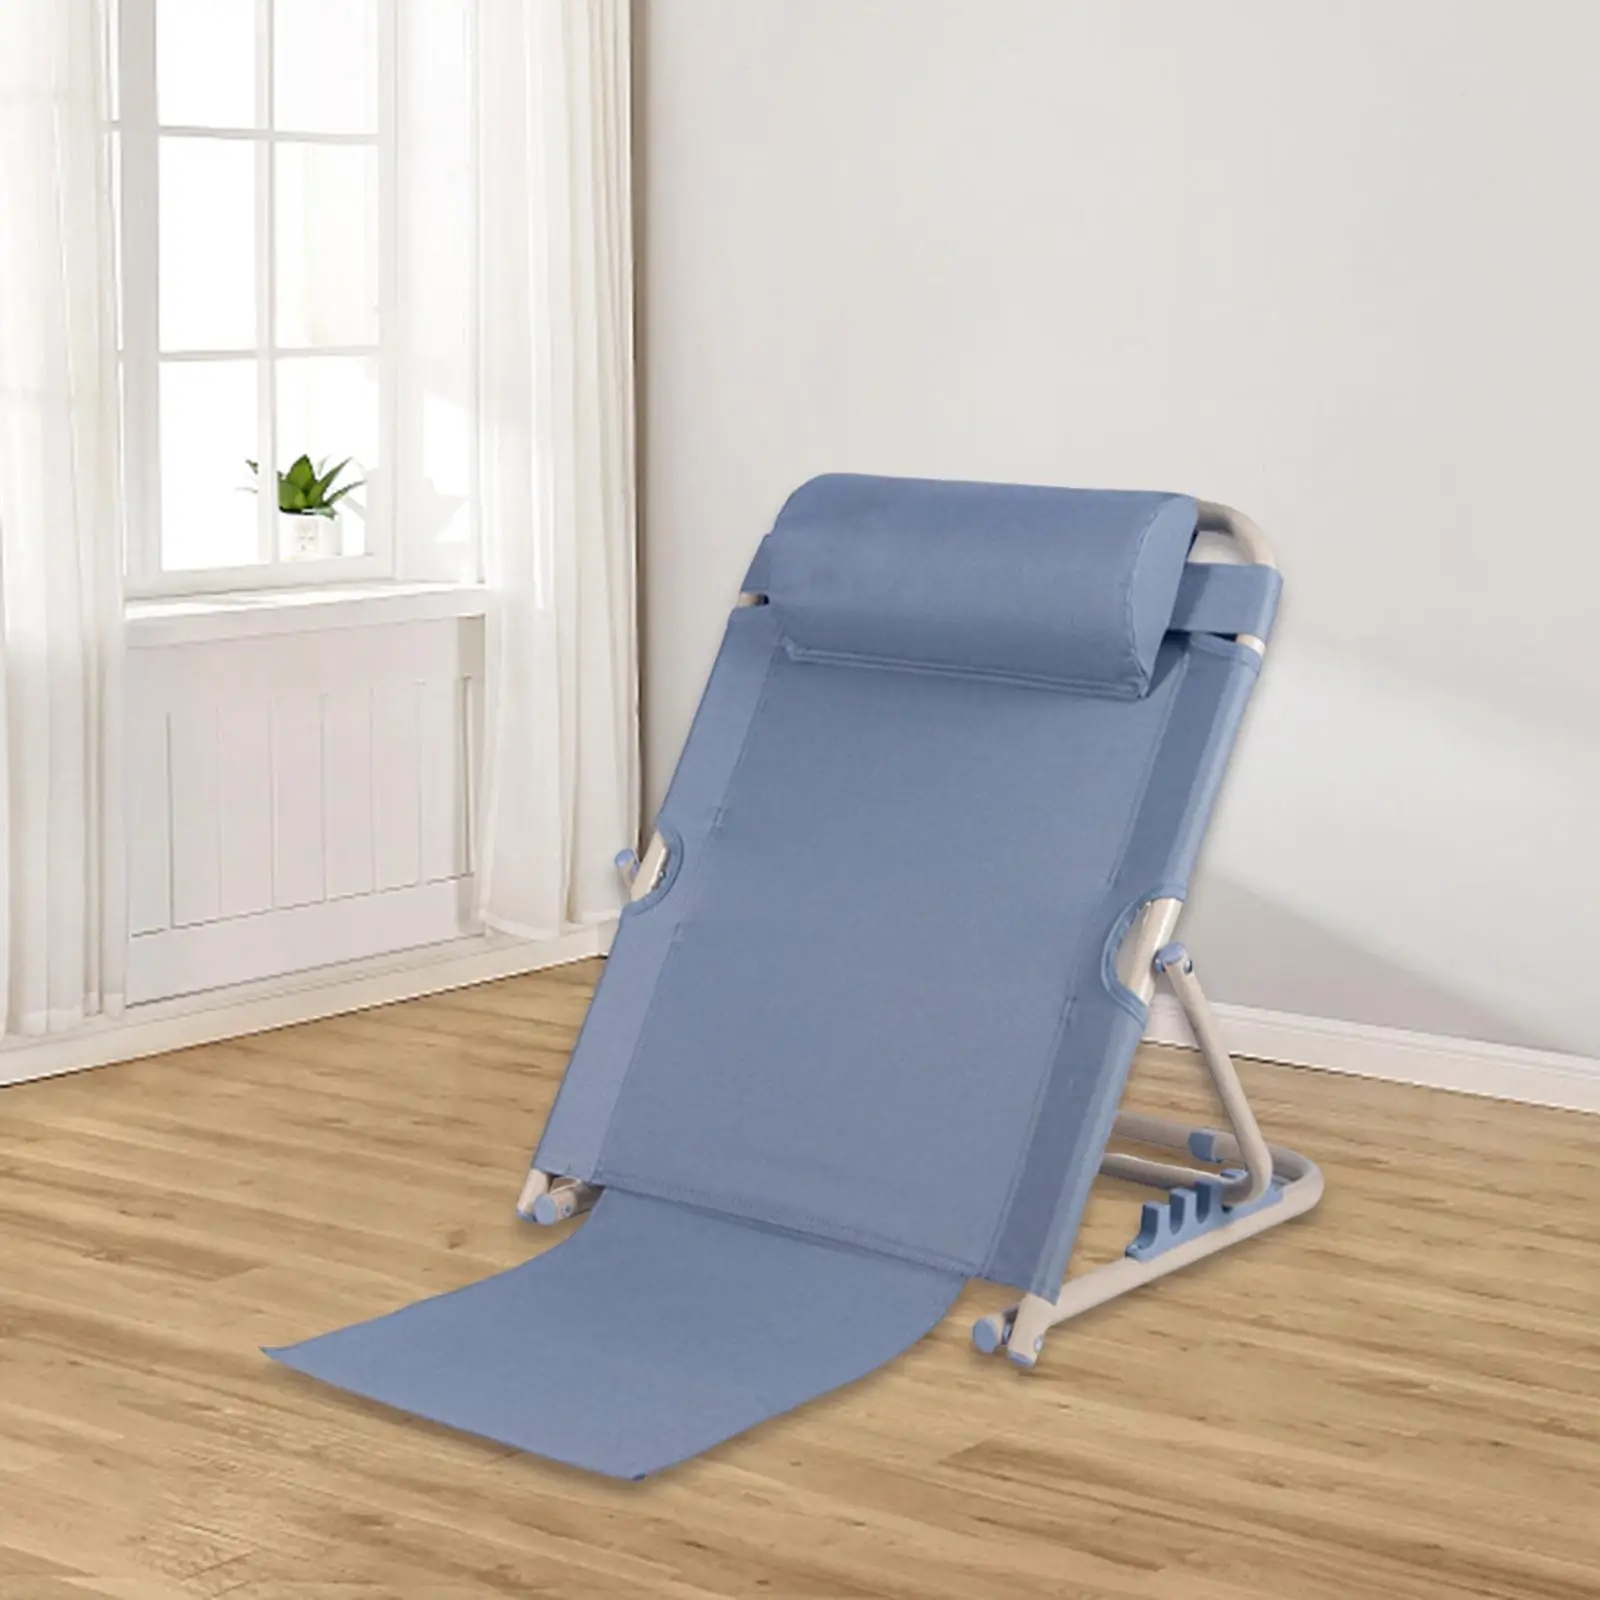 Bed Backrest Folding Adjustable Chair Portable for Adult with Head Cushion Multi Function Support Back Rest for Head Neck